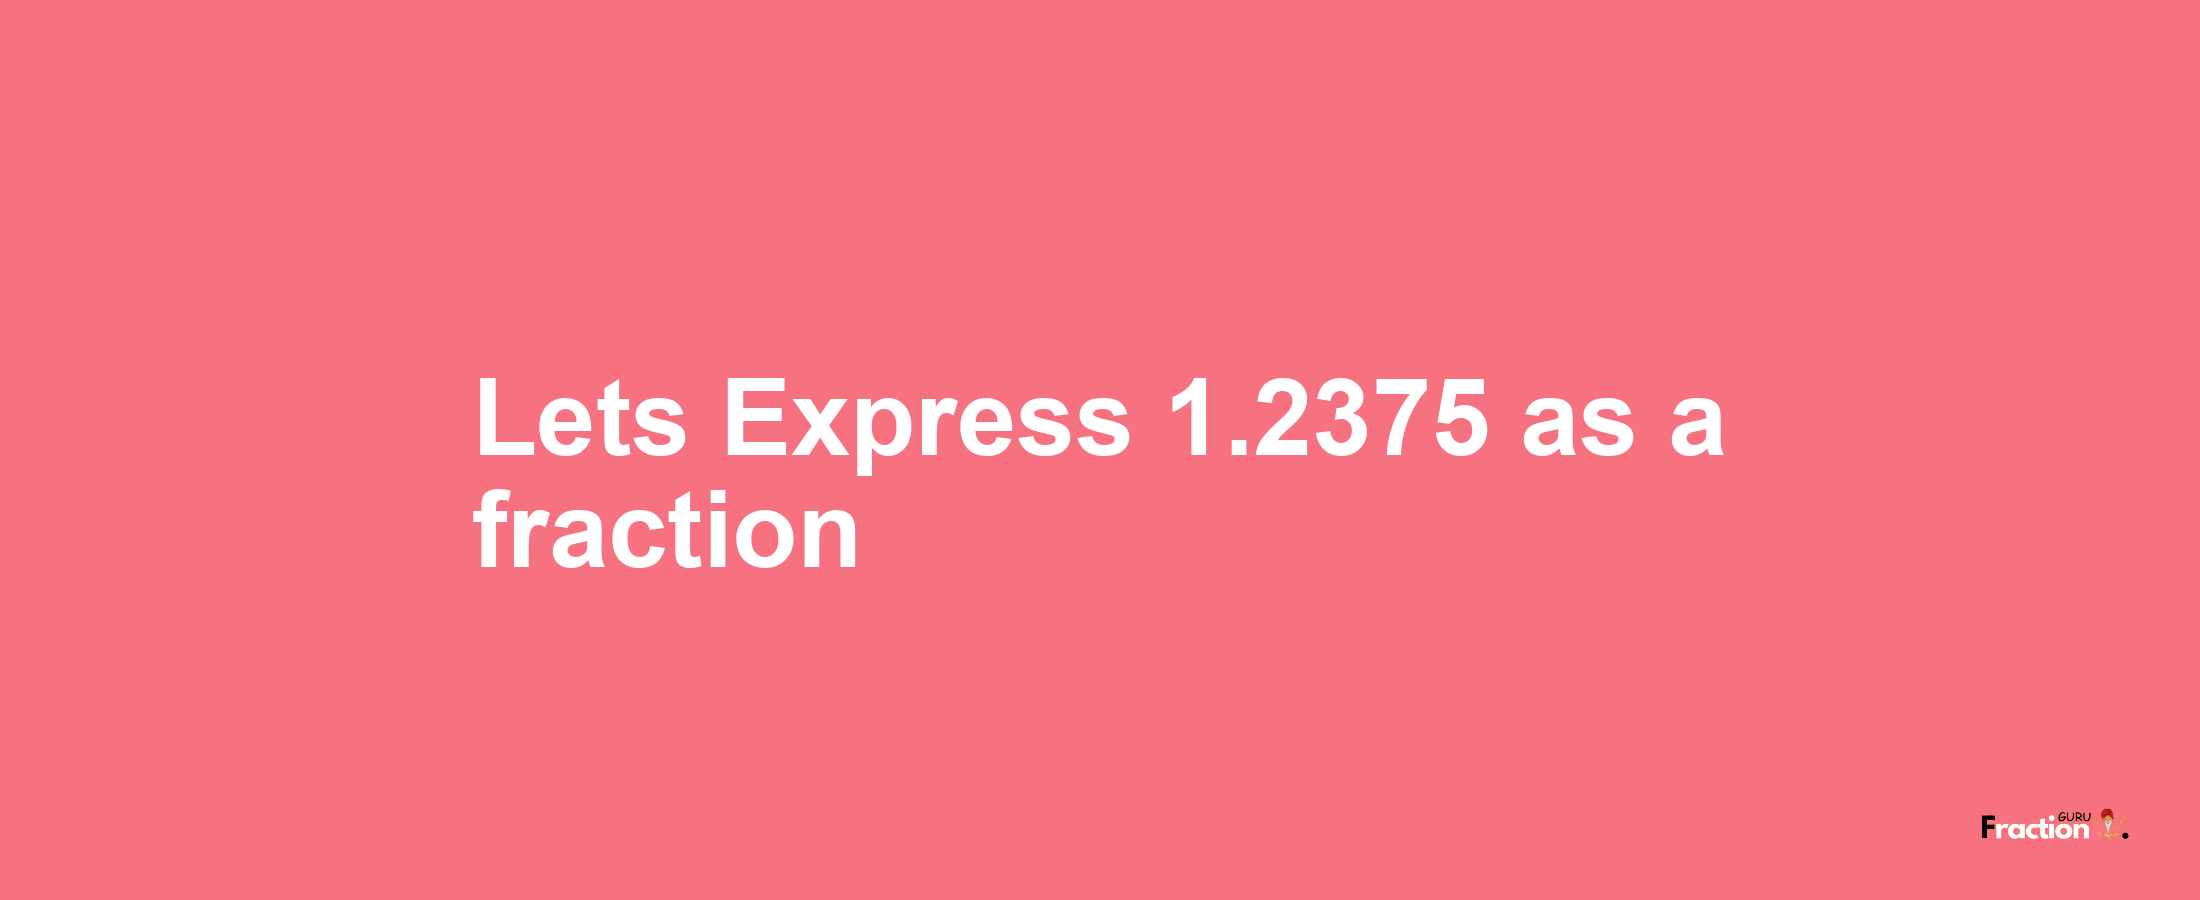 Lets Express 1.2375 as afraction